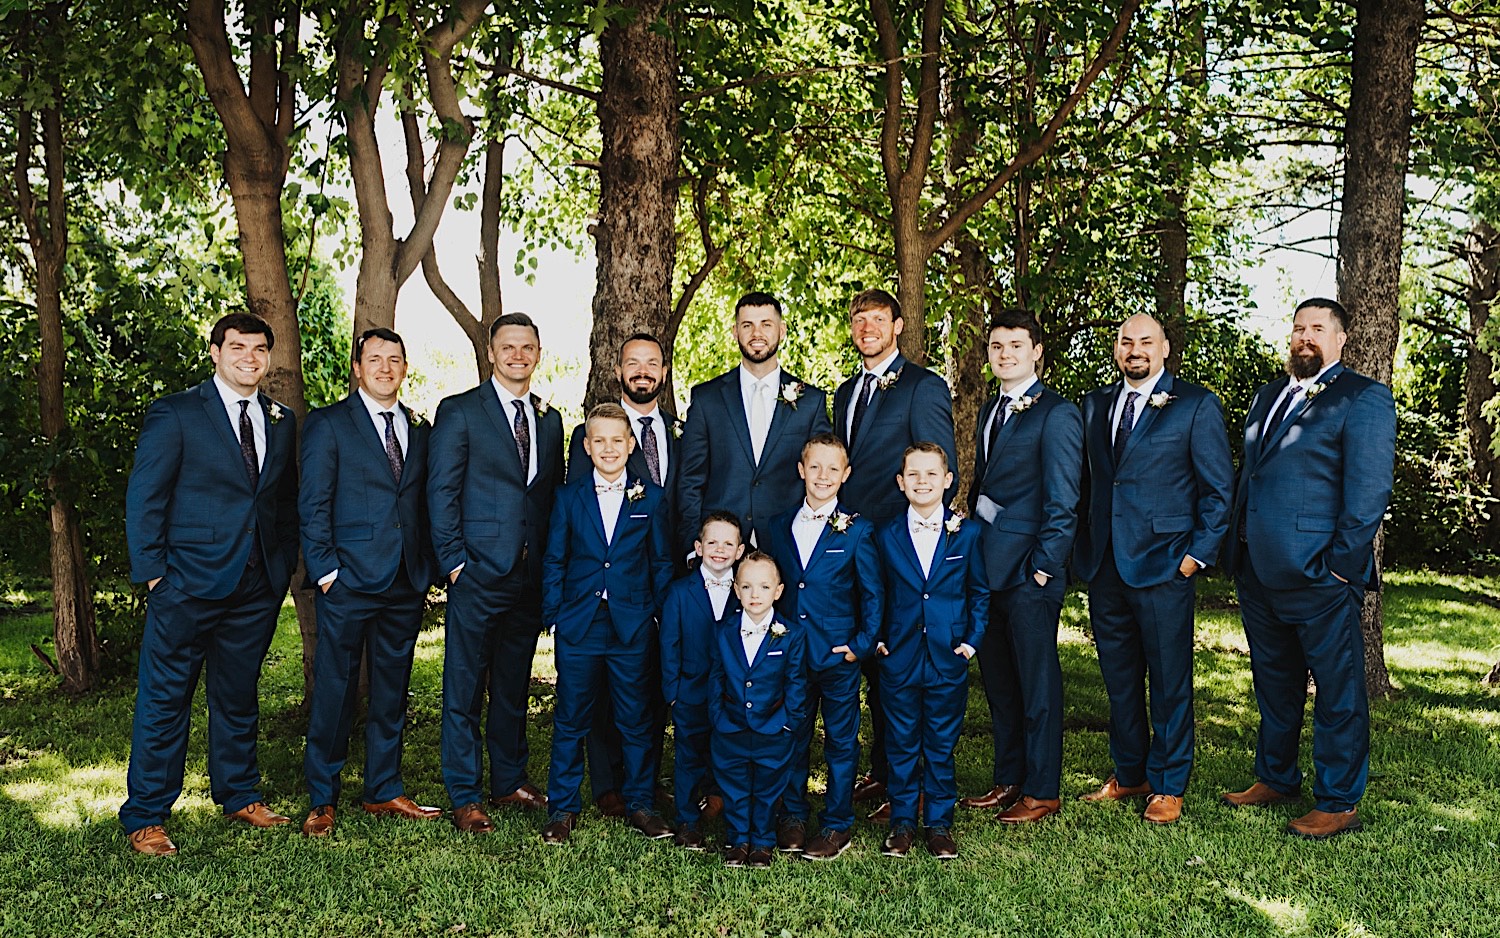 A groom stands with his groomsmen and the ring bearers as they all smile at the camera while in front of a row of trees after a wedding ceremony at Legacy Hill Farm